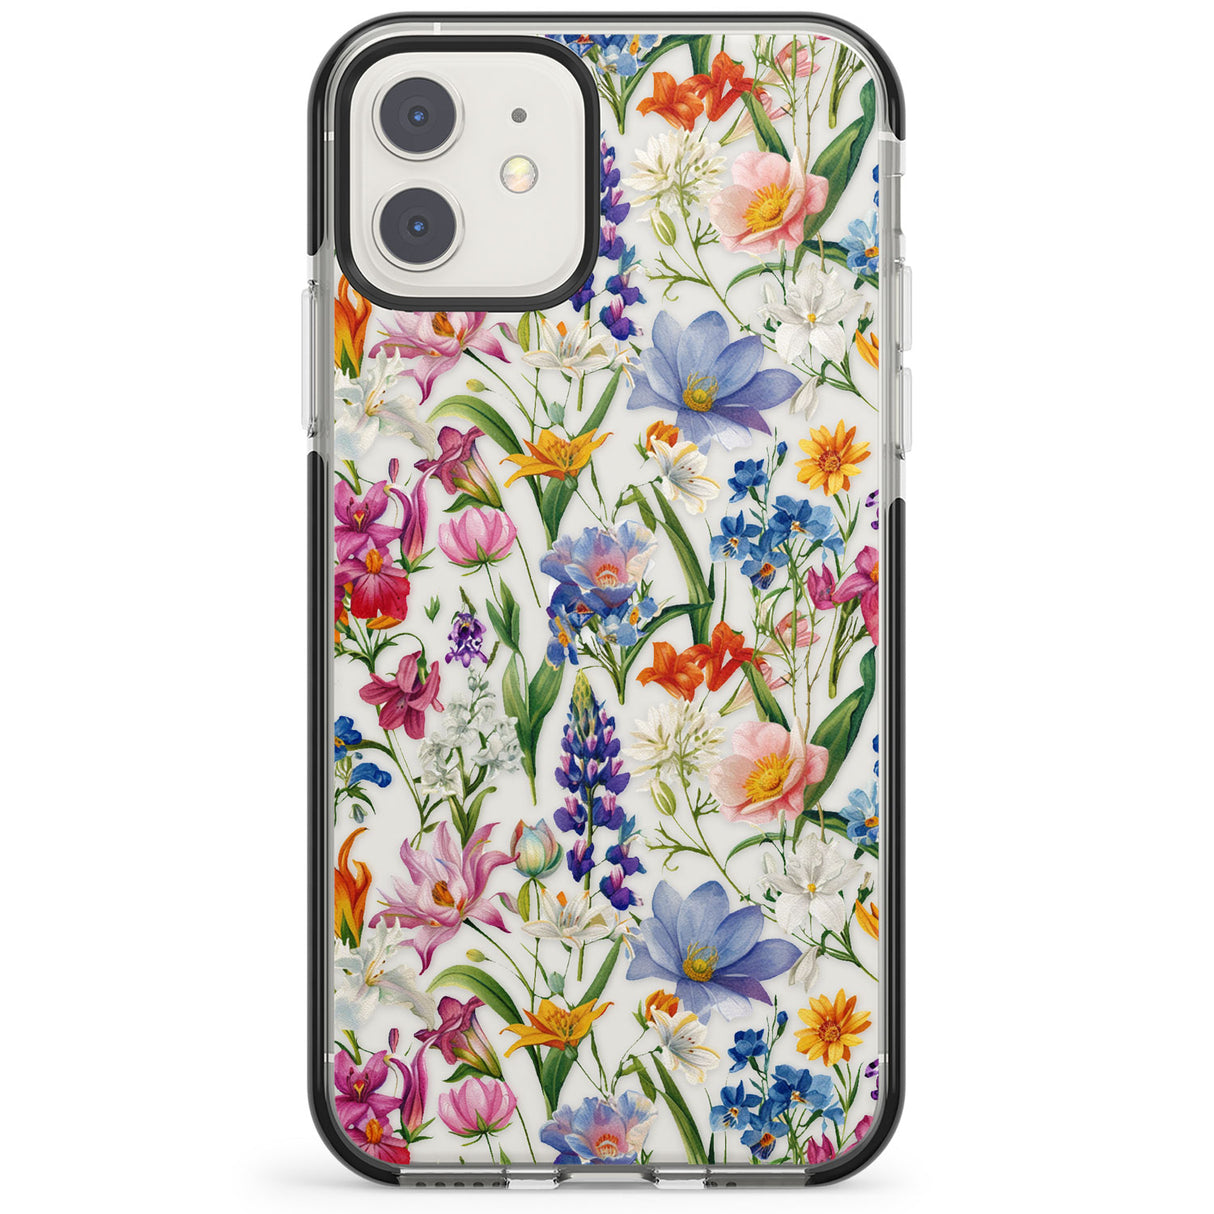 Vintage Wildflowers Impact Phone Case for iPhone 11, iphone 12